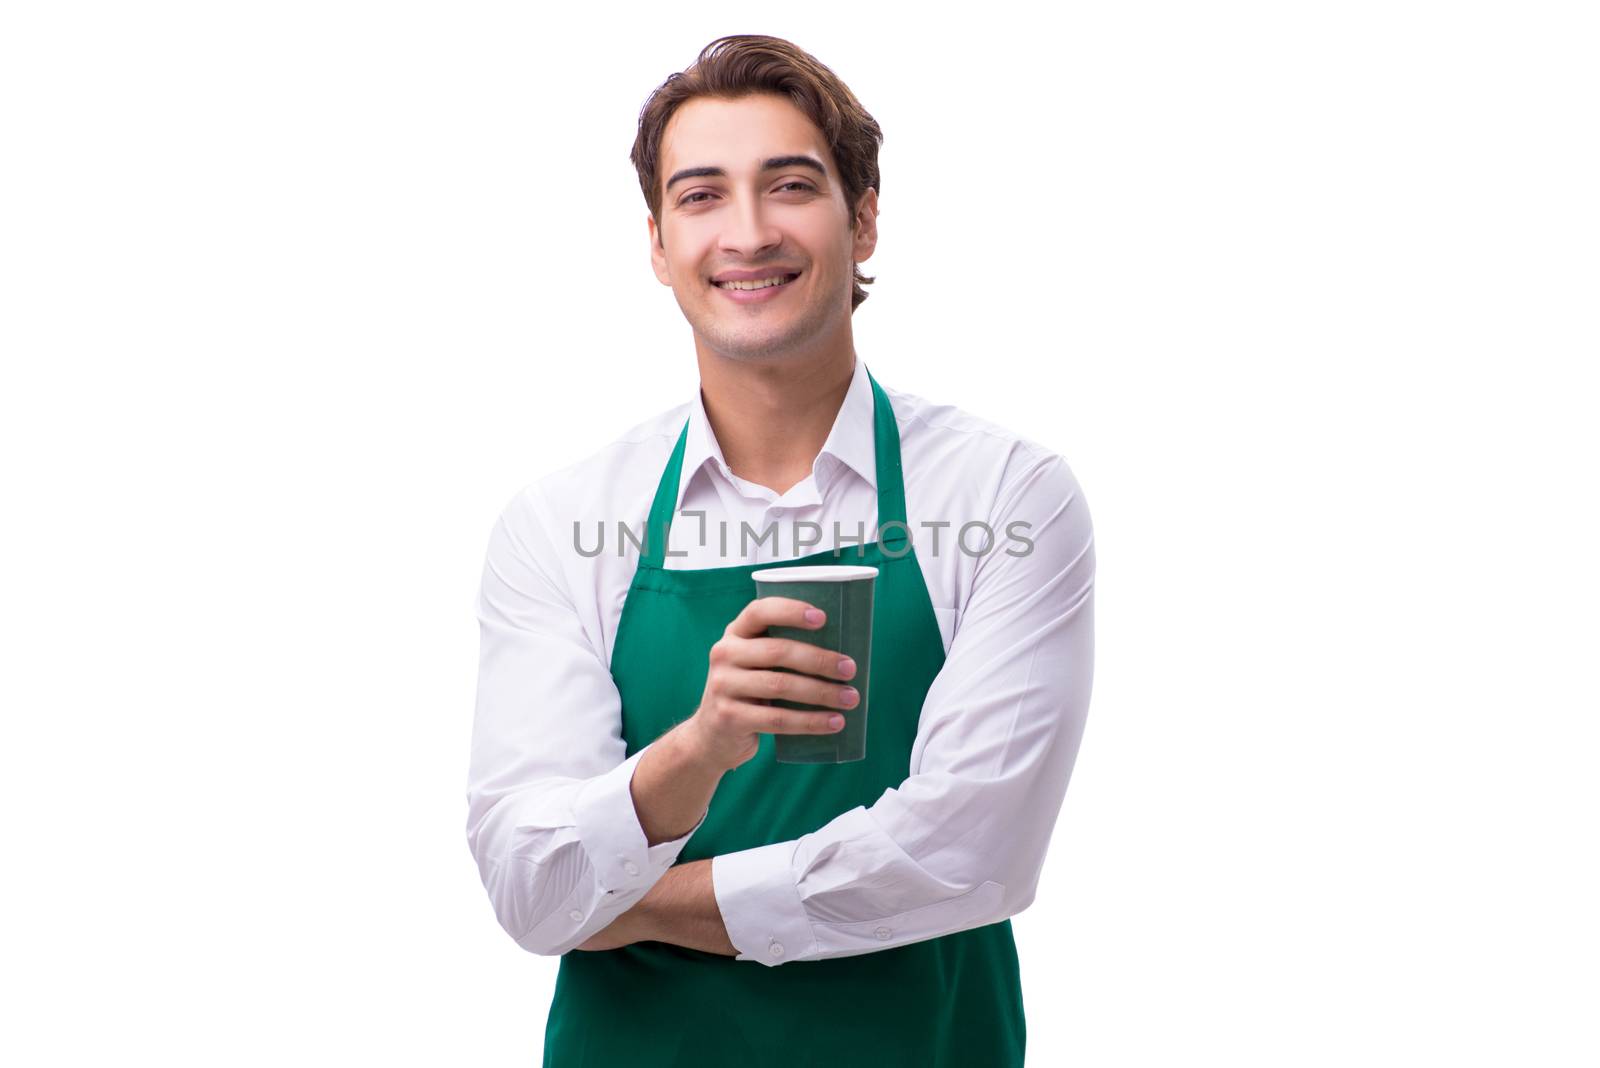 Young barista isolated on white background